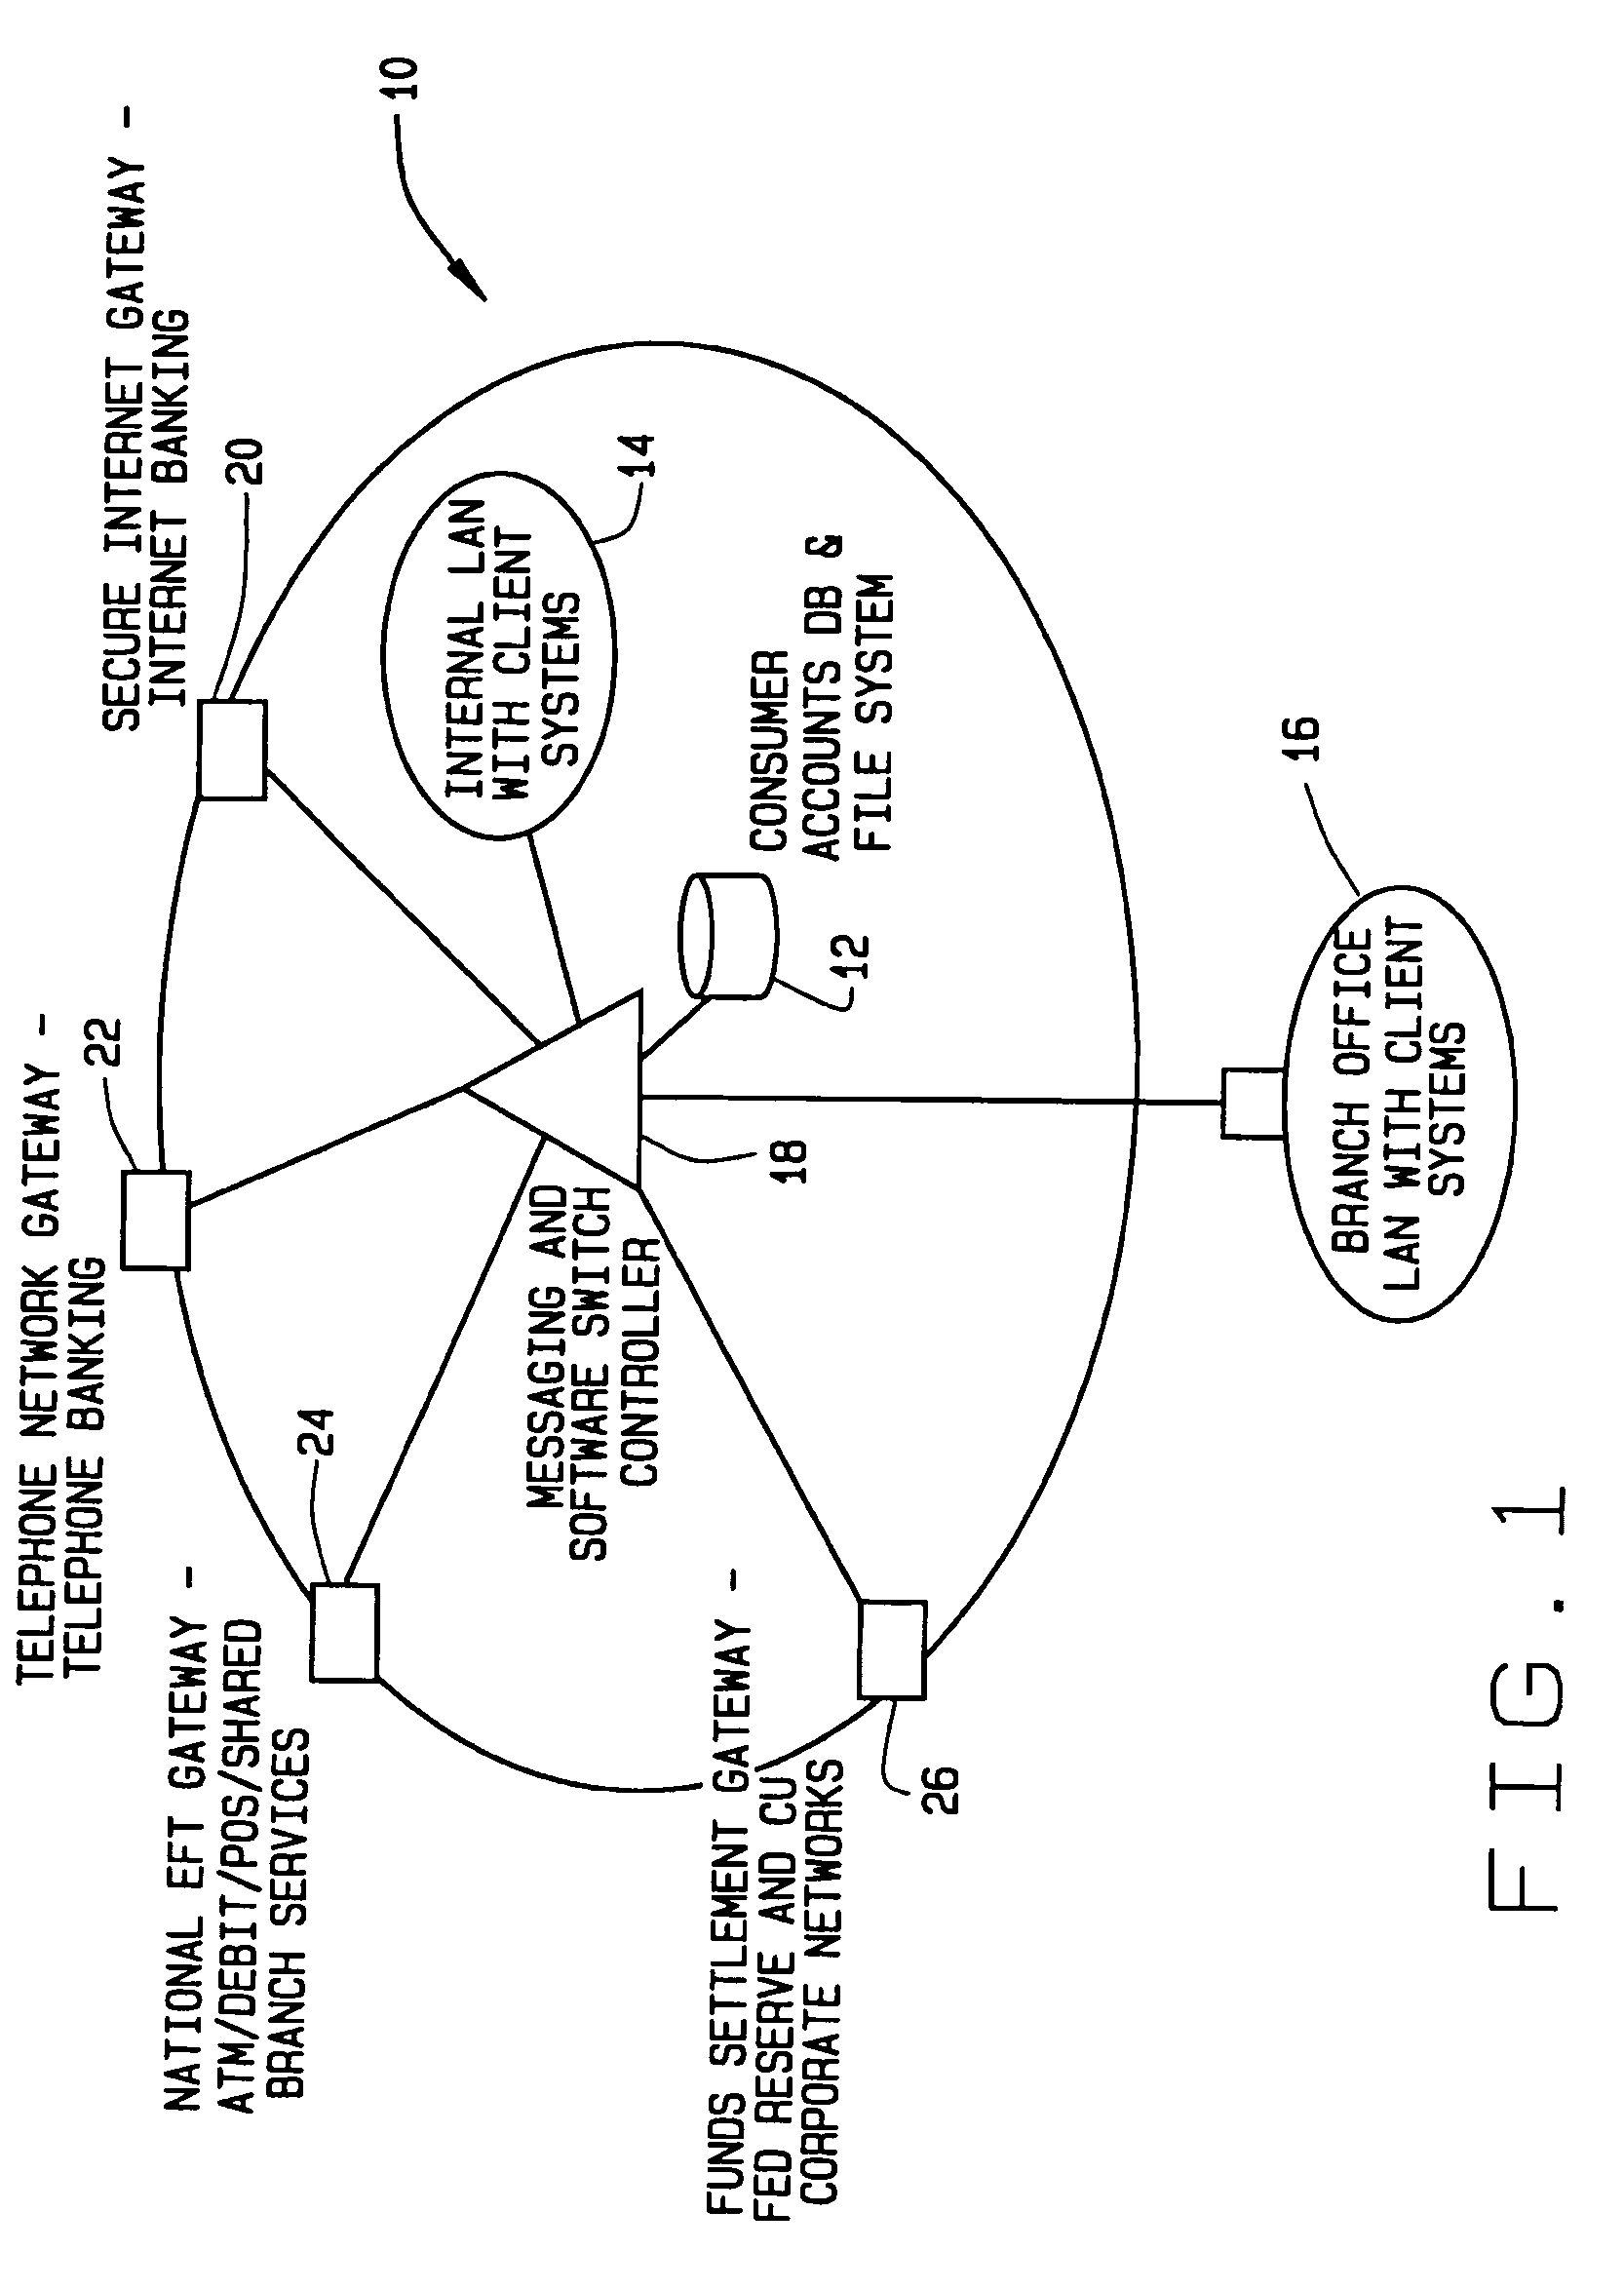 Methods and systems for processing, accounting, and administration of stored value cards